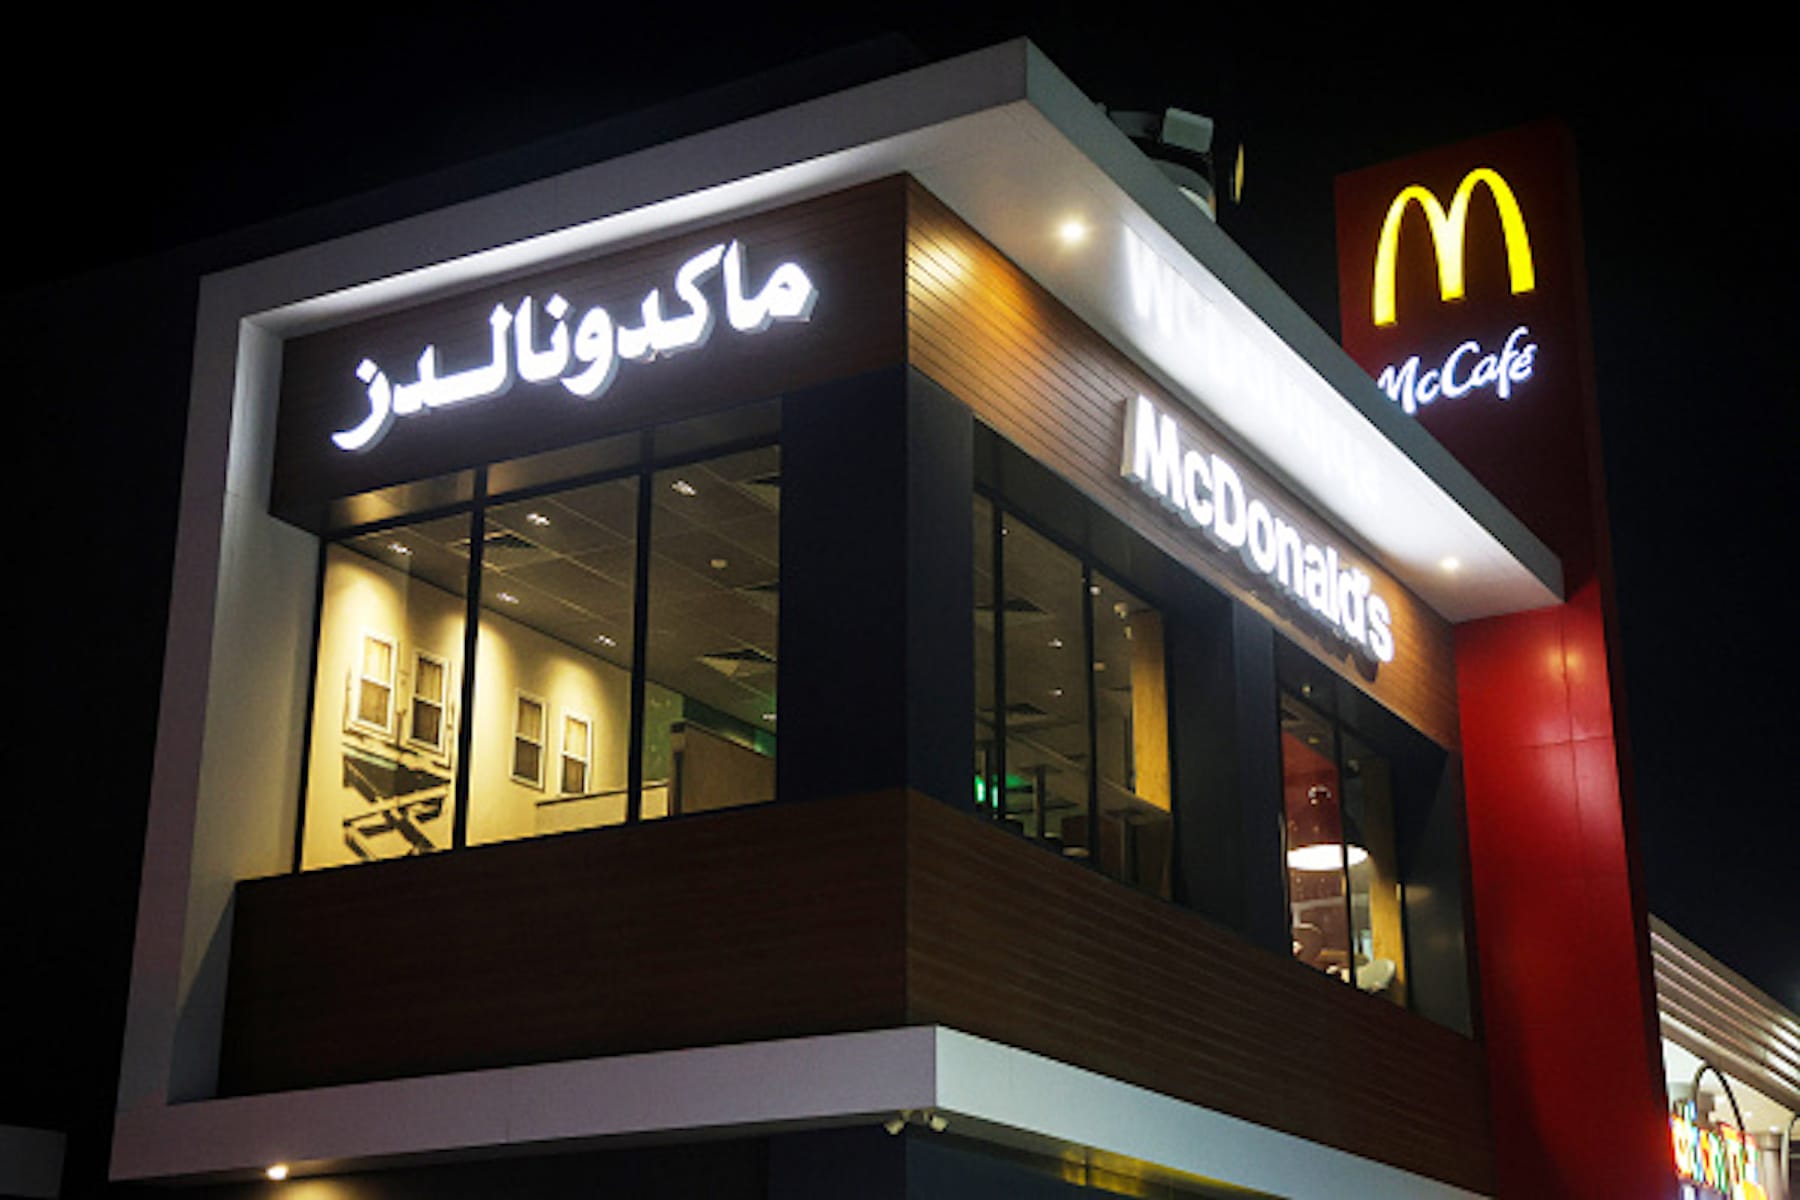 McDonald's Is Buying Back Its Franchises In Israel After People Started Boycotting It For Supporting Israel’s War On Gaza